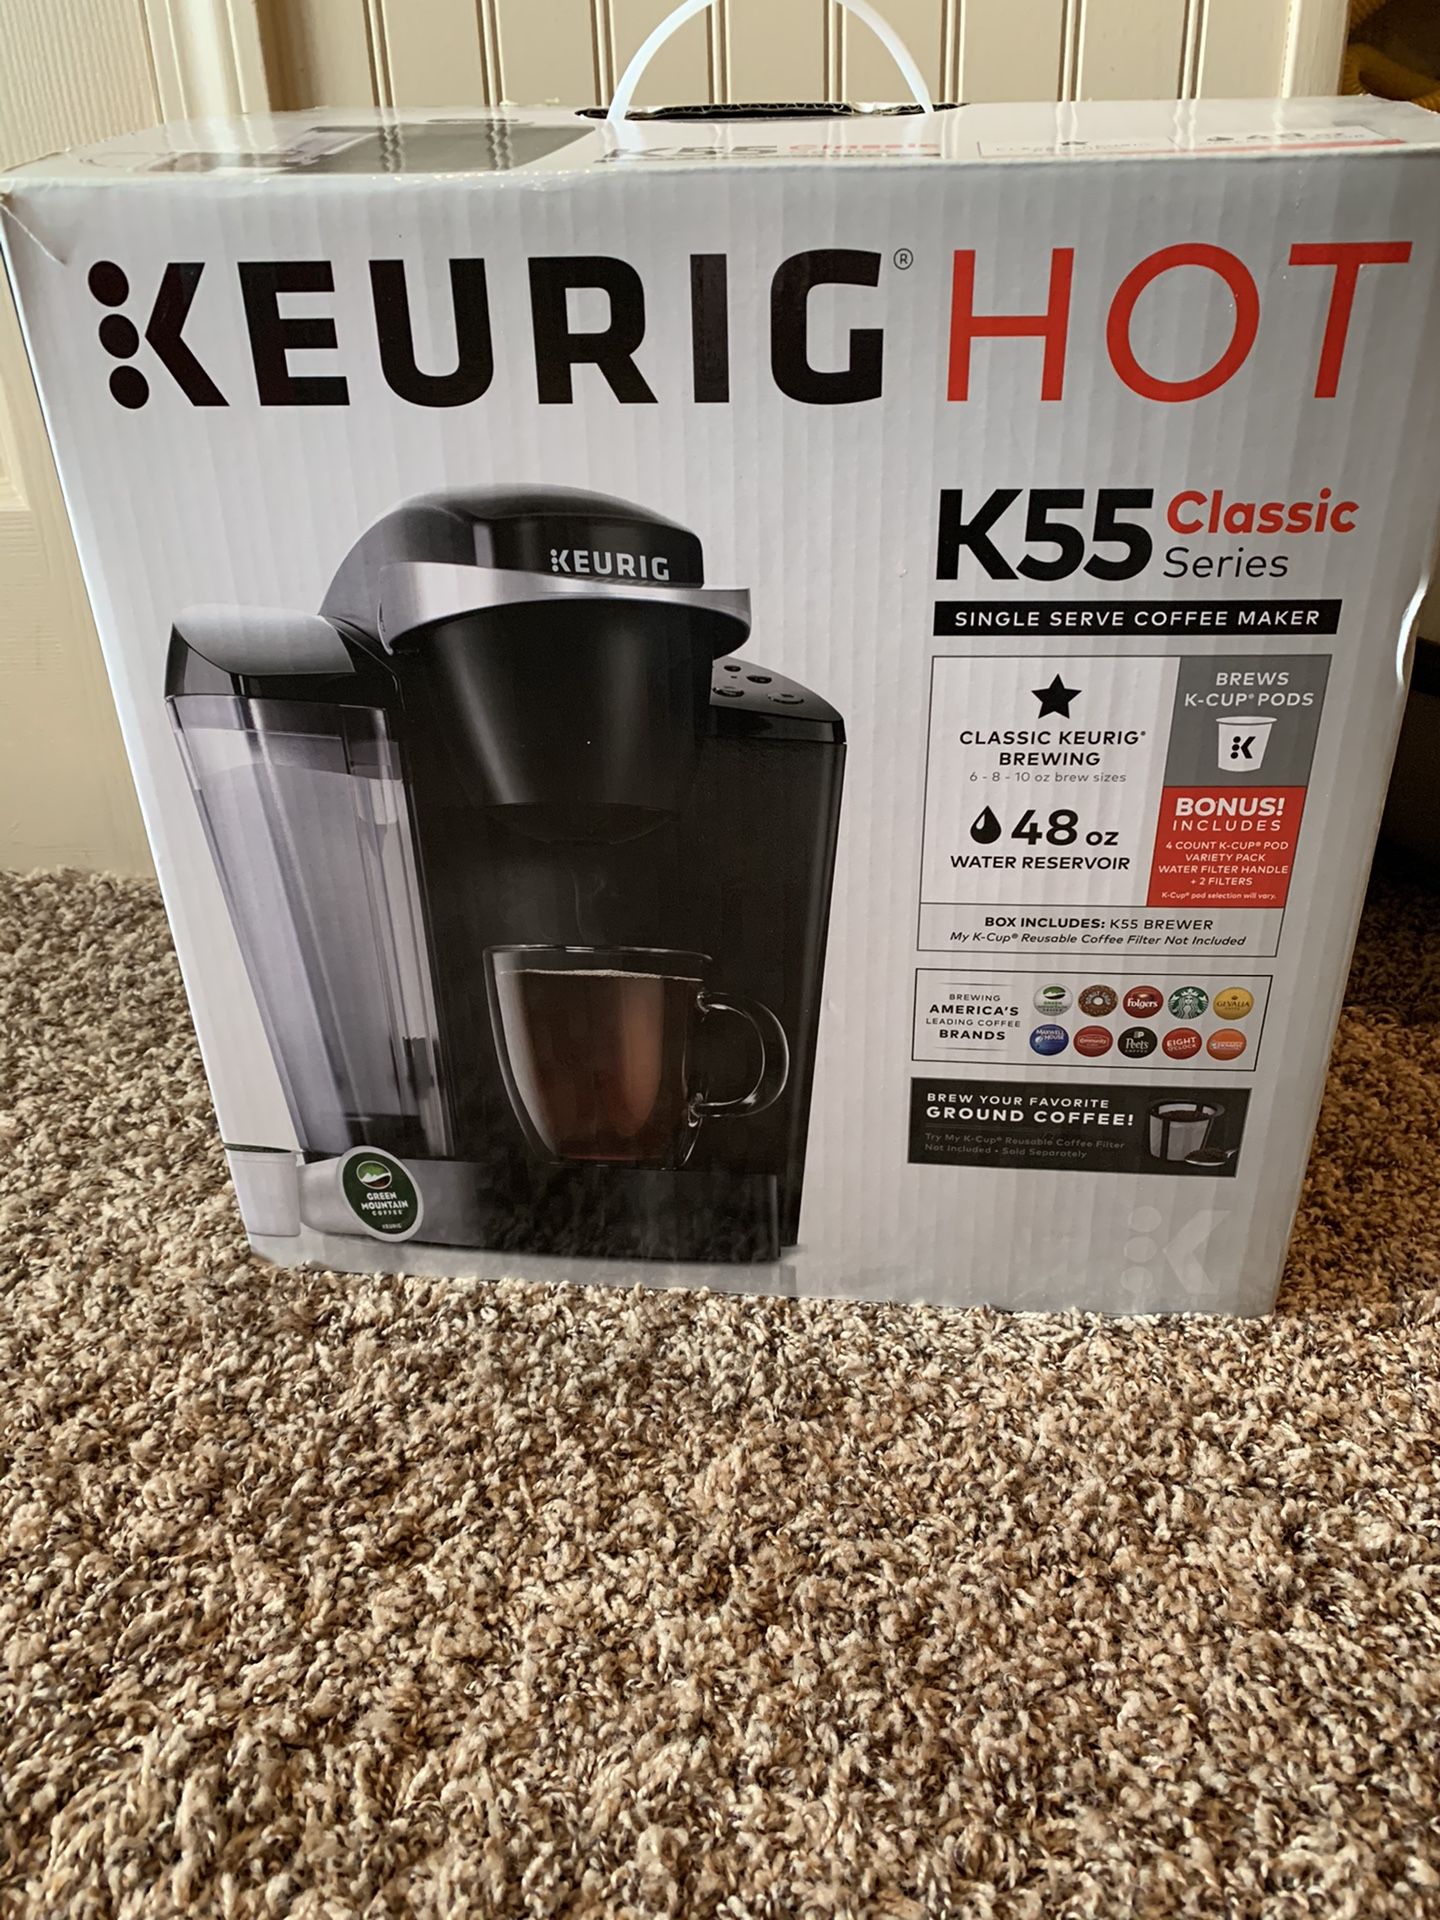 Keurig Hot K55 Classic Commerical Style Coffee Maker